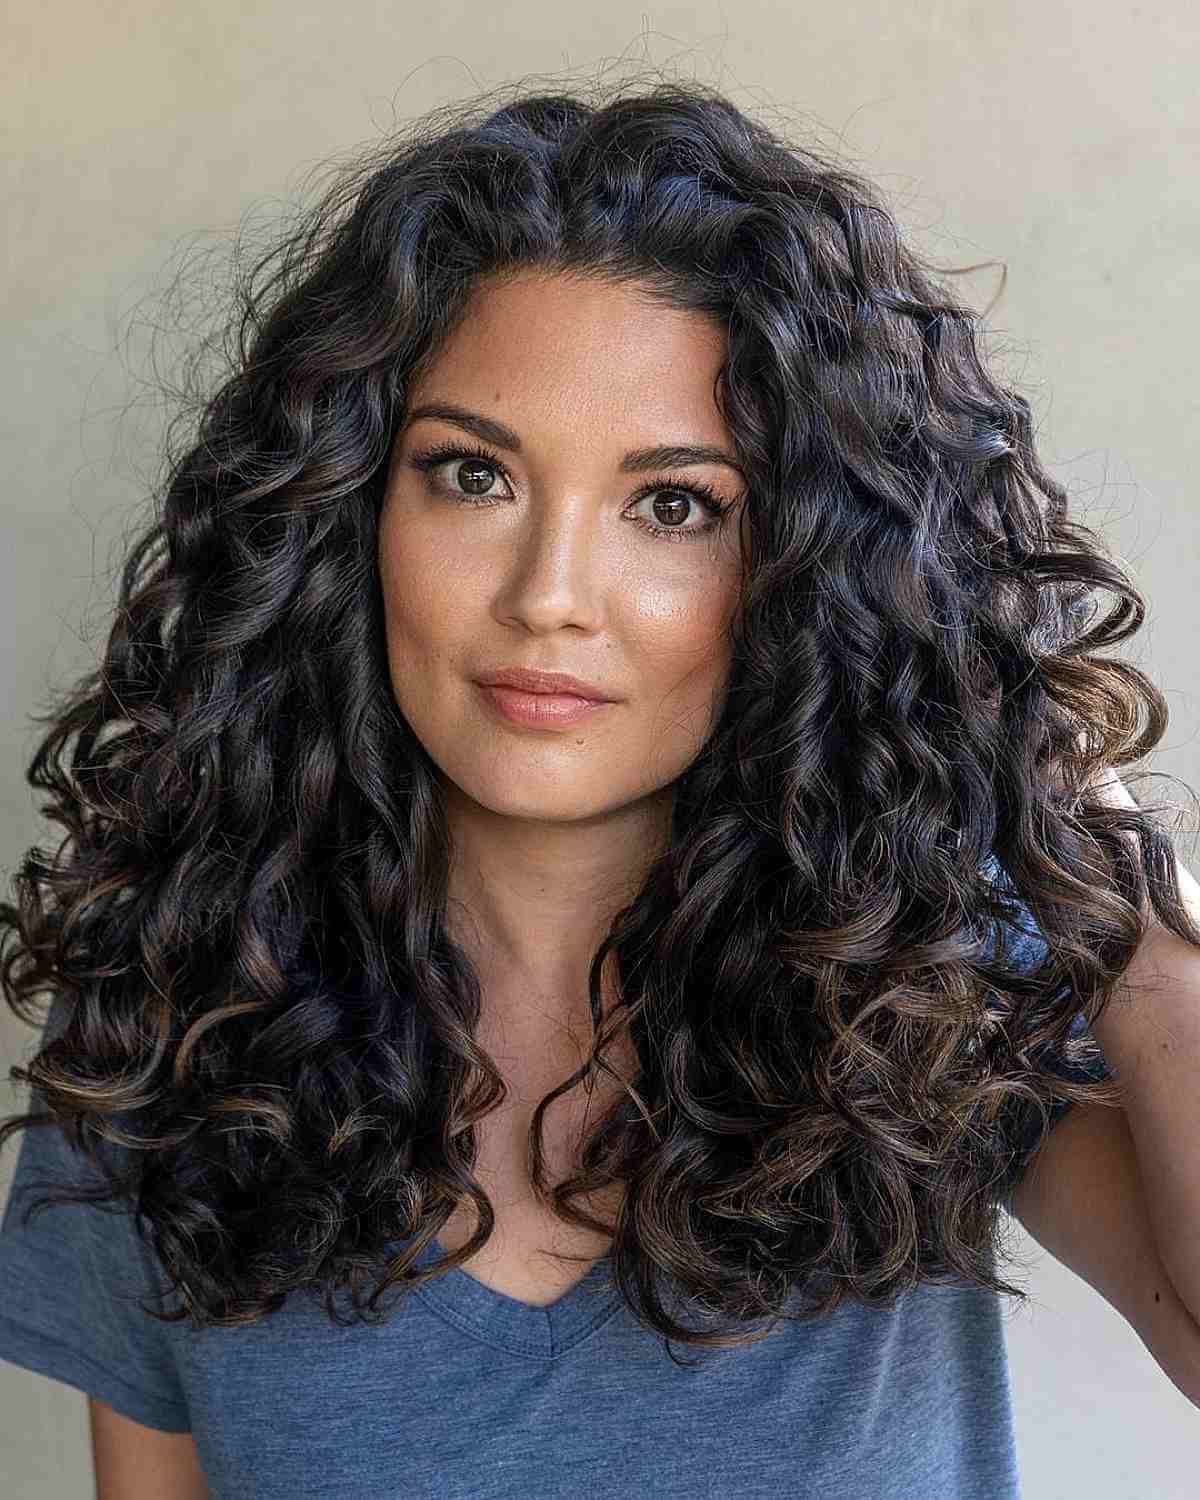 62 Best Shoulder Length Curly Hair Cuts & Styles In 2022 Pertaining To Most Current Easy Medium Length Hairstyles For Thick Wavy Hair (View 6 of 20)